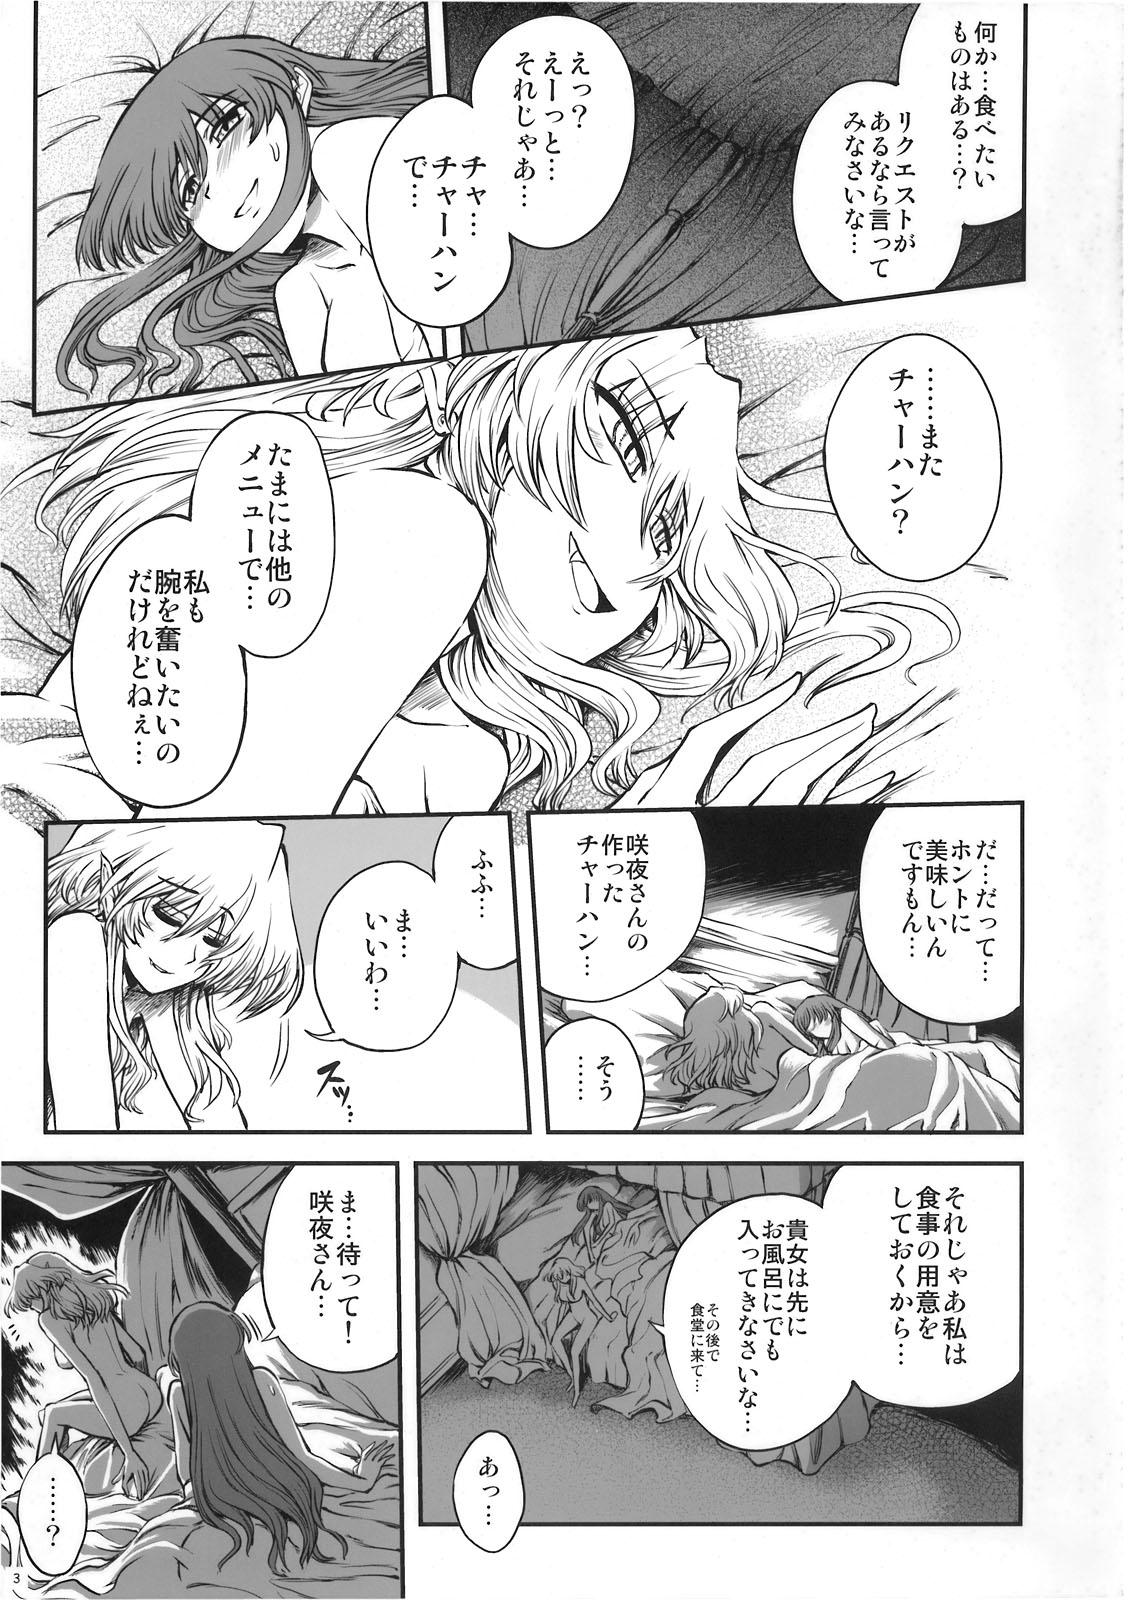 Hairy Luna Dial Maid to Chi no Unmei dokei Lunatic+alpha - Touhou project Massages - Page 4